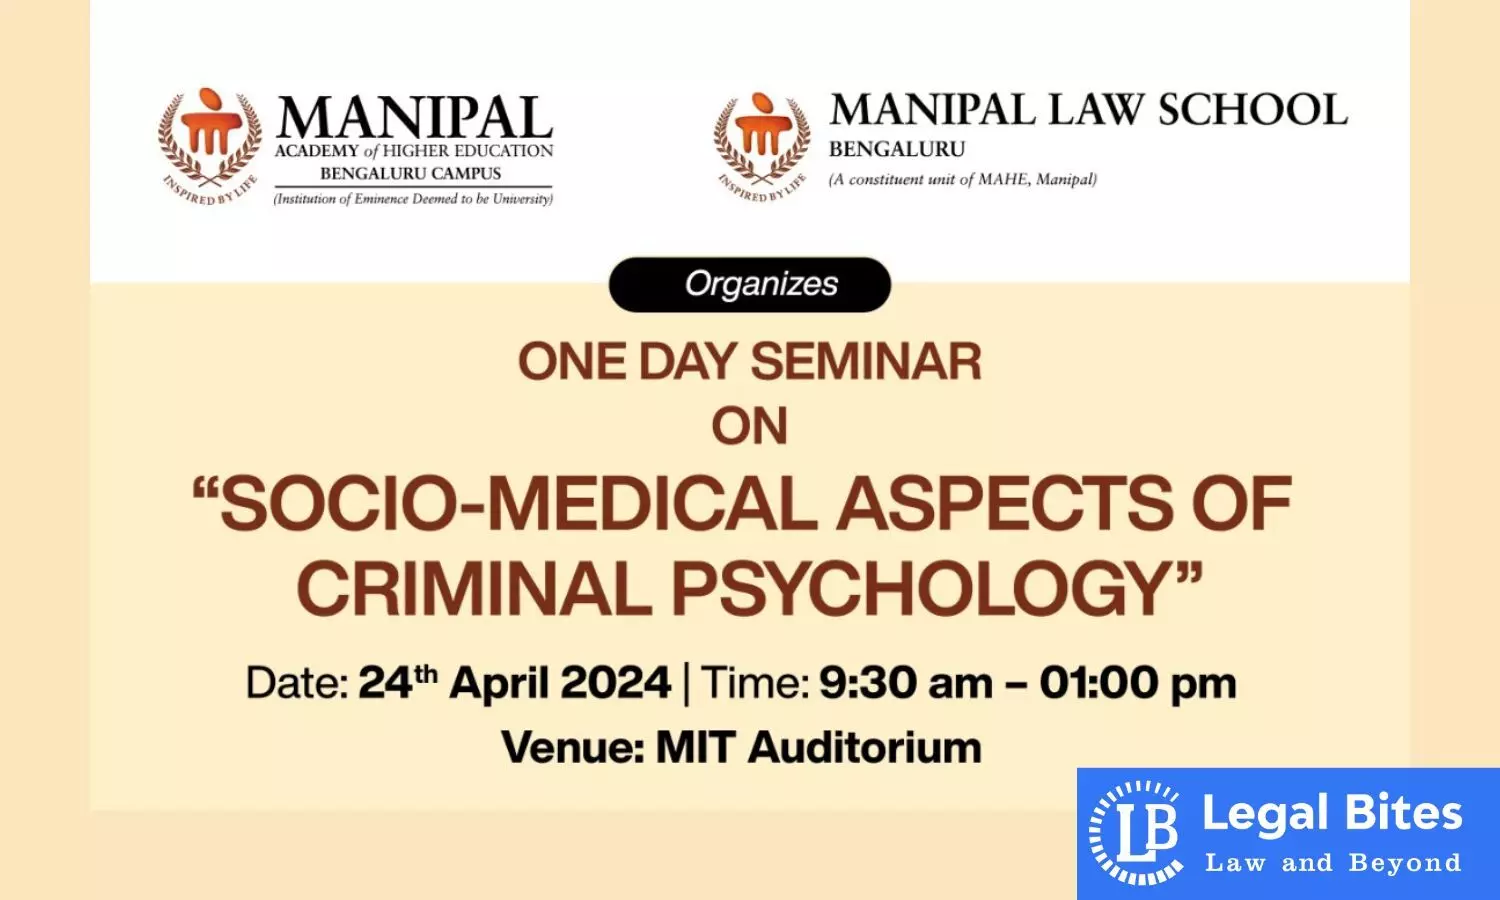 One Day Panel Discussion on Socio-Medical Aspects of Criminal Psychology (Hybrid Mode) | Manipal Law School (MAHE) Bengaluru | 24 April 2024